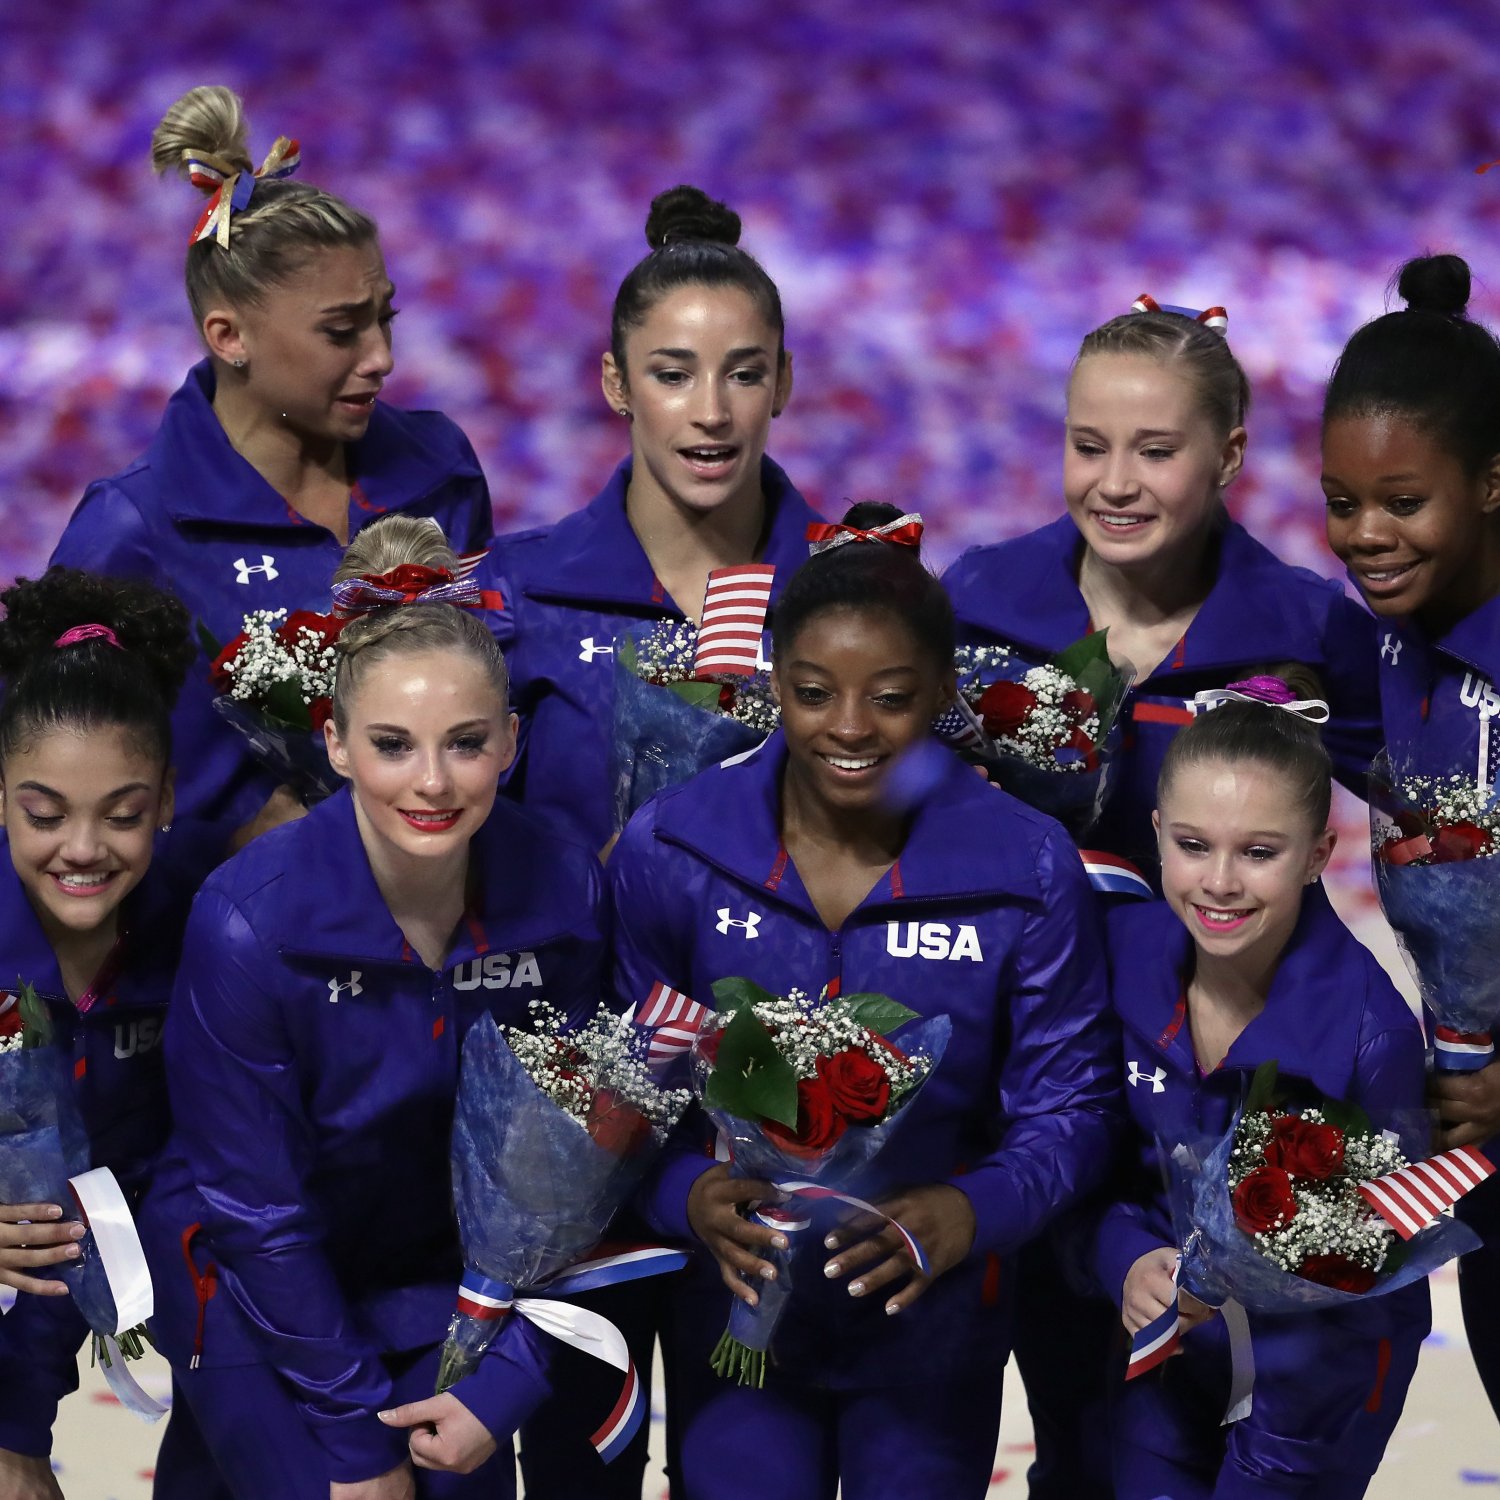 Winners and Losers of the 2016 US Women's Gymnastics Olympic Trials